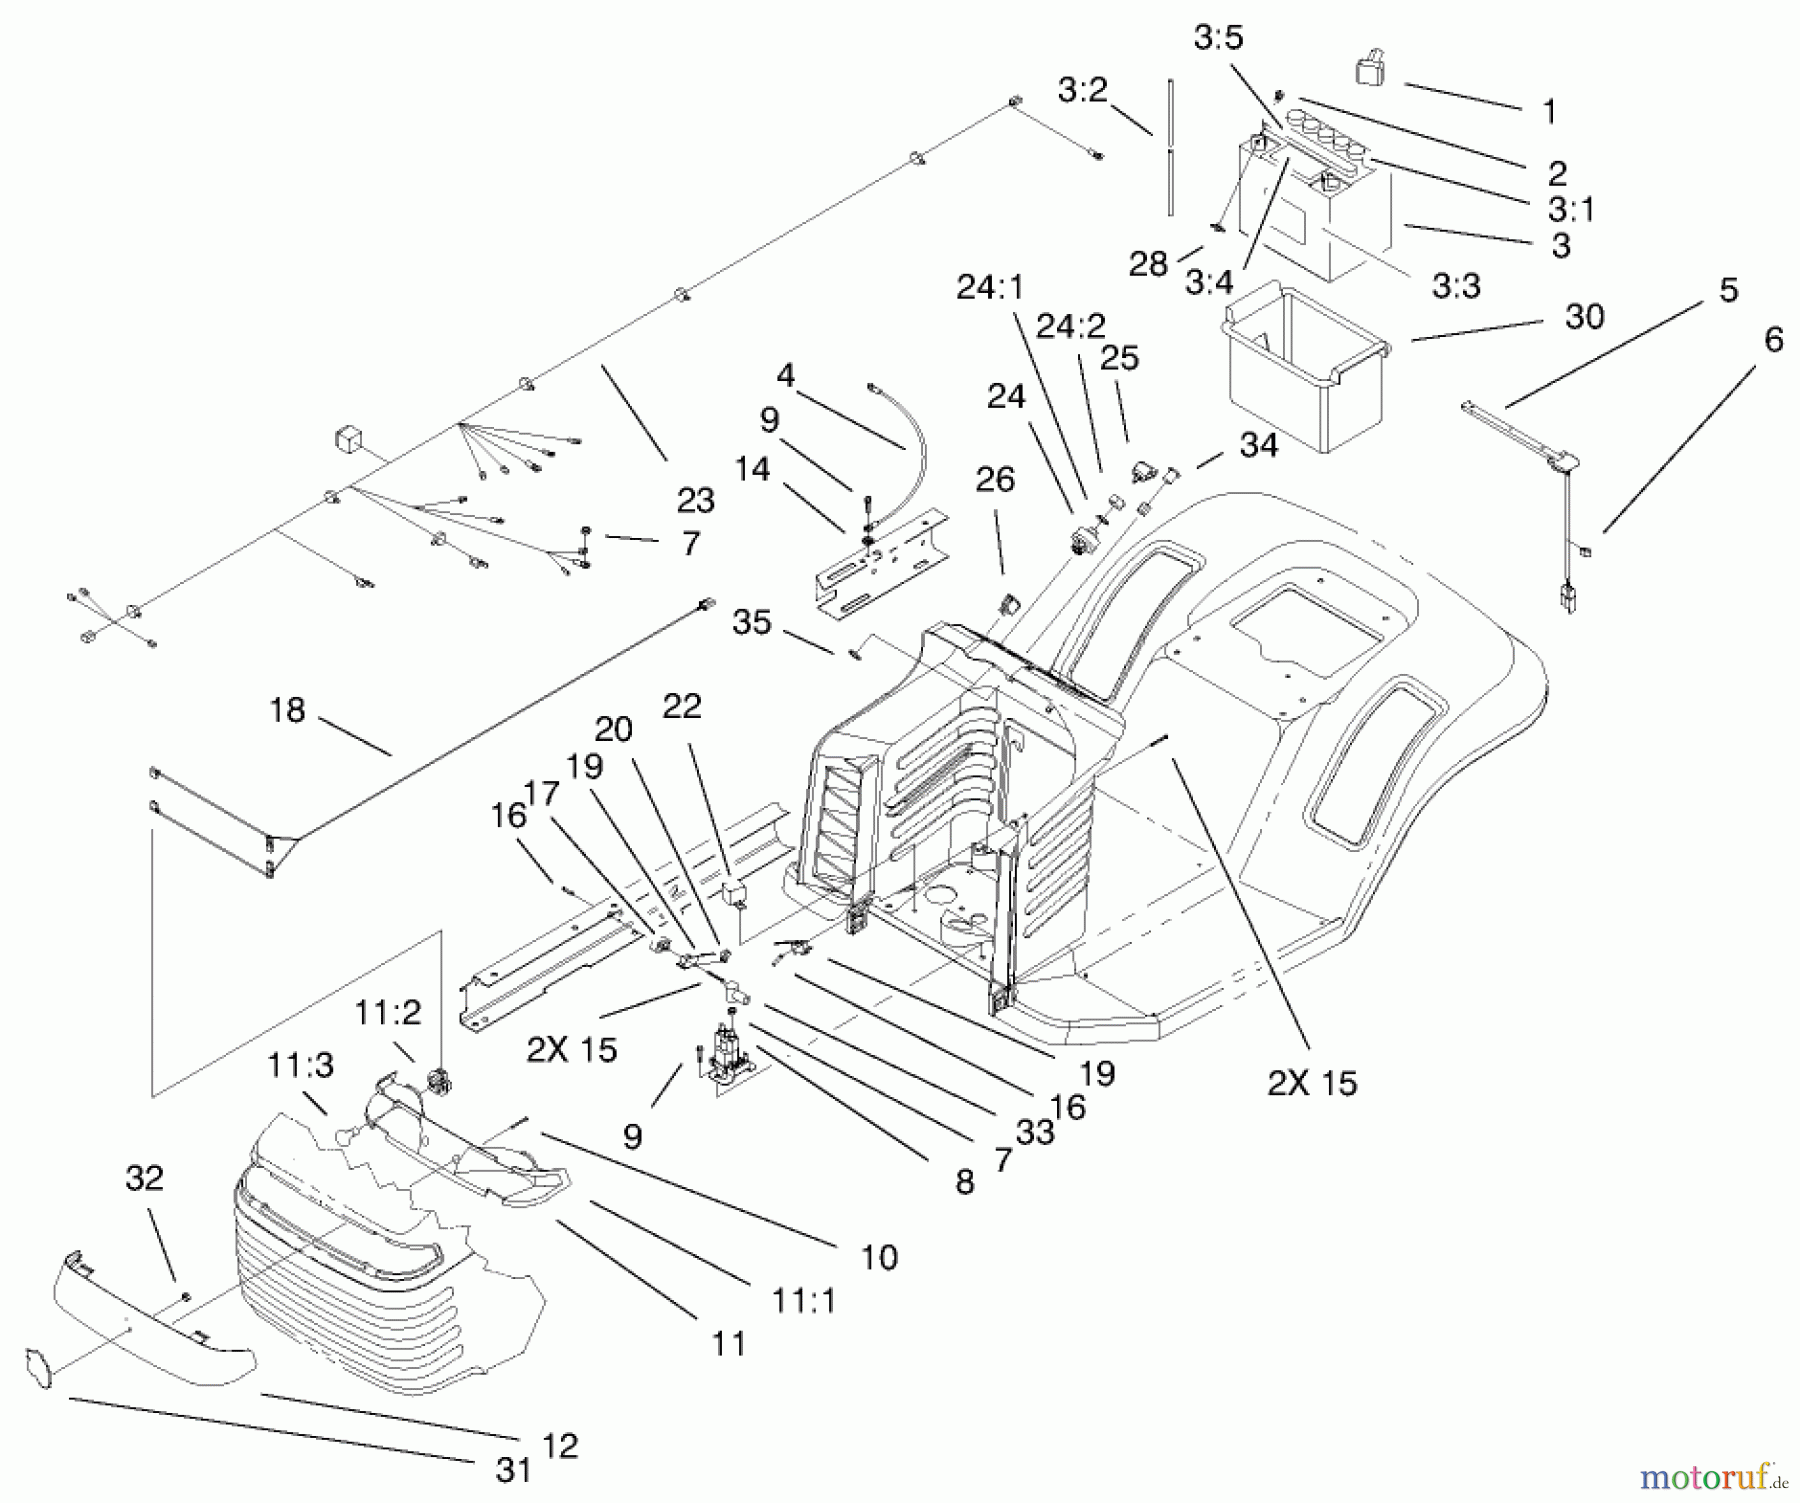  Toro Neu Mowers, Lawn & Garden Tractor Seite 1 71197 (17-44HXL) - Toro 17-44HXL Lawn Tractor, 1999 (9900001-9999999) ELECTRICAL COMPONENTS ASSEMBLY